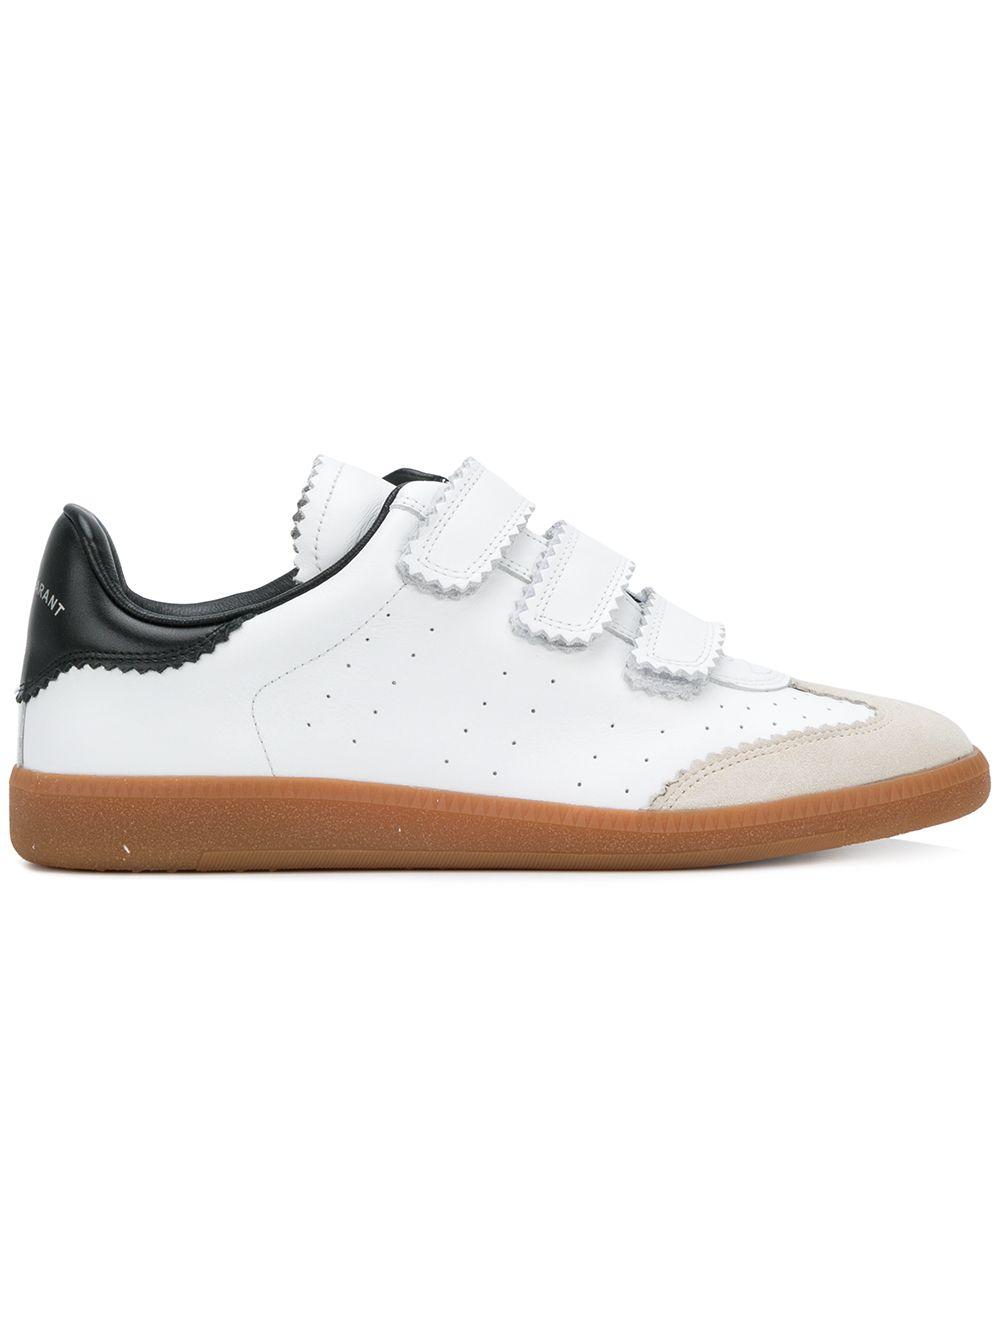 Isabel Marant Leather Beth Three-strap Sneakers in White - Lyst